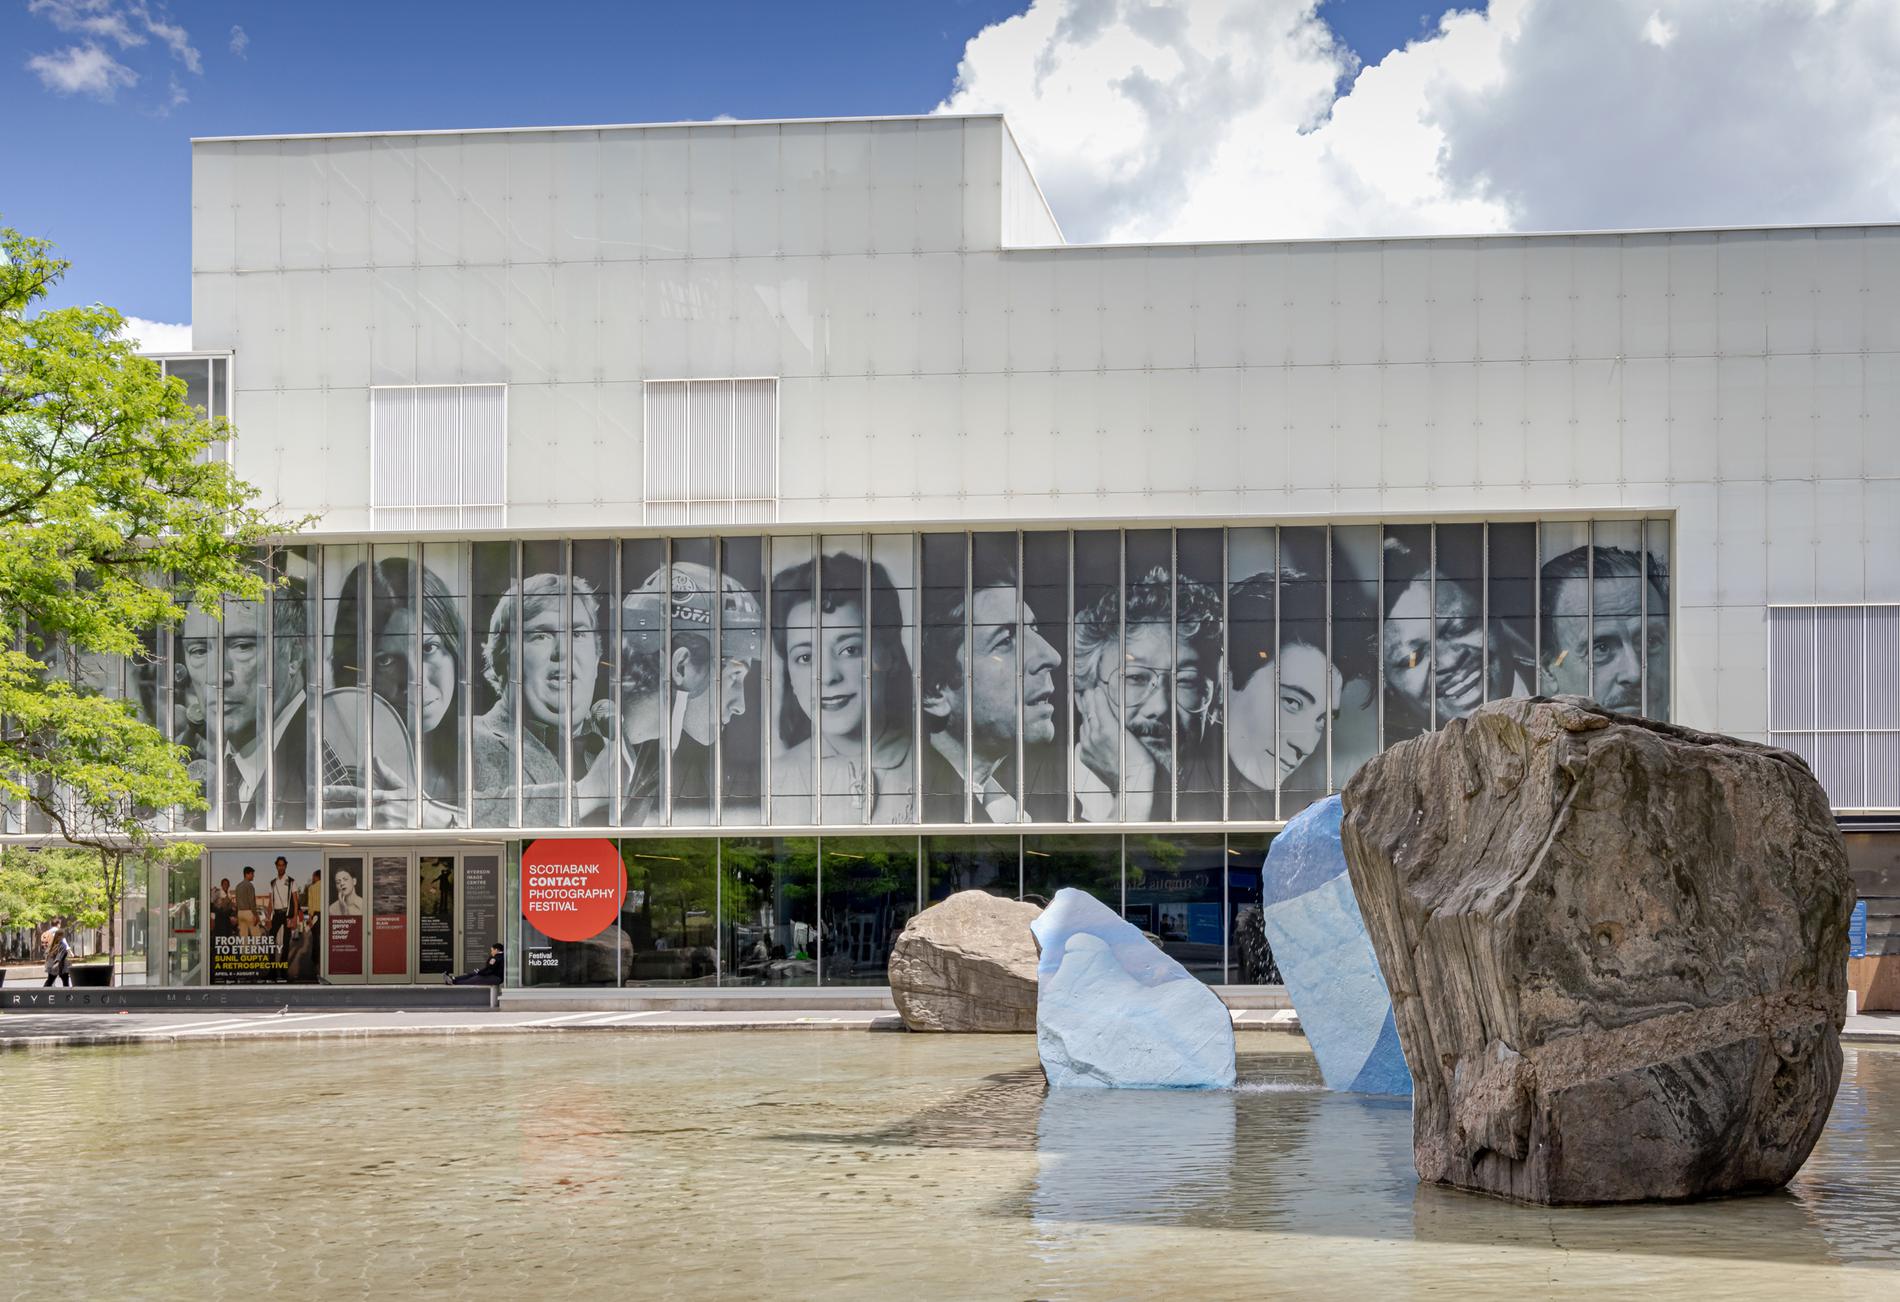 Front exterior of The Image Centre featuring installation on rocks in pond adjacent